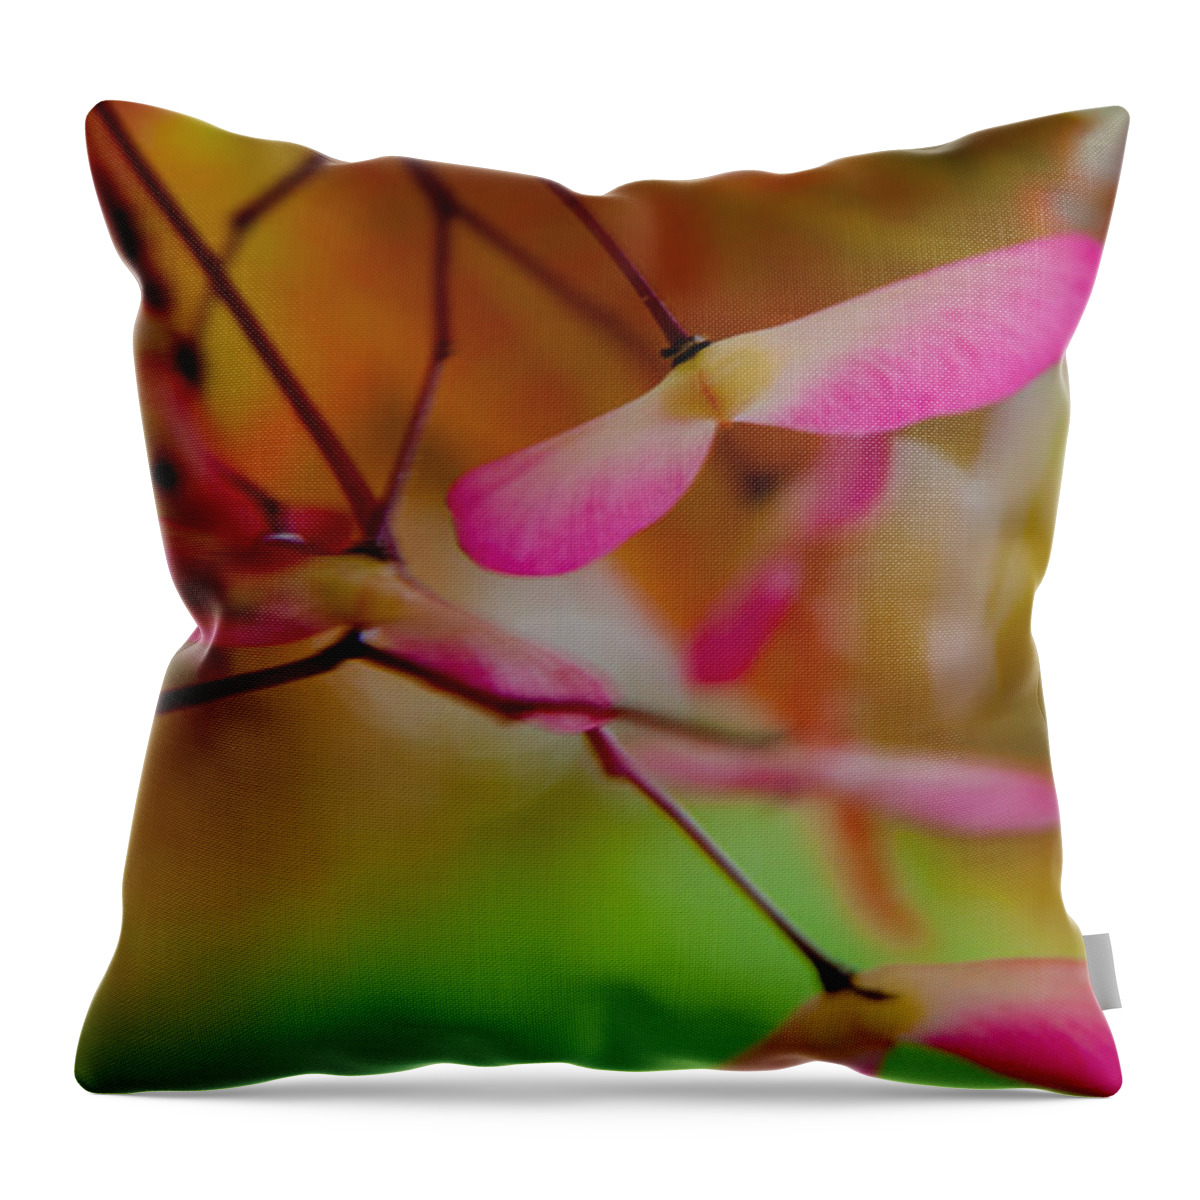 Japanese Maple Throw Pillow featuring the photograph Japanese Maple Seedling by Brenda Jacobs